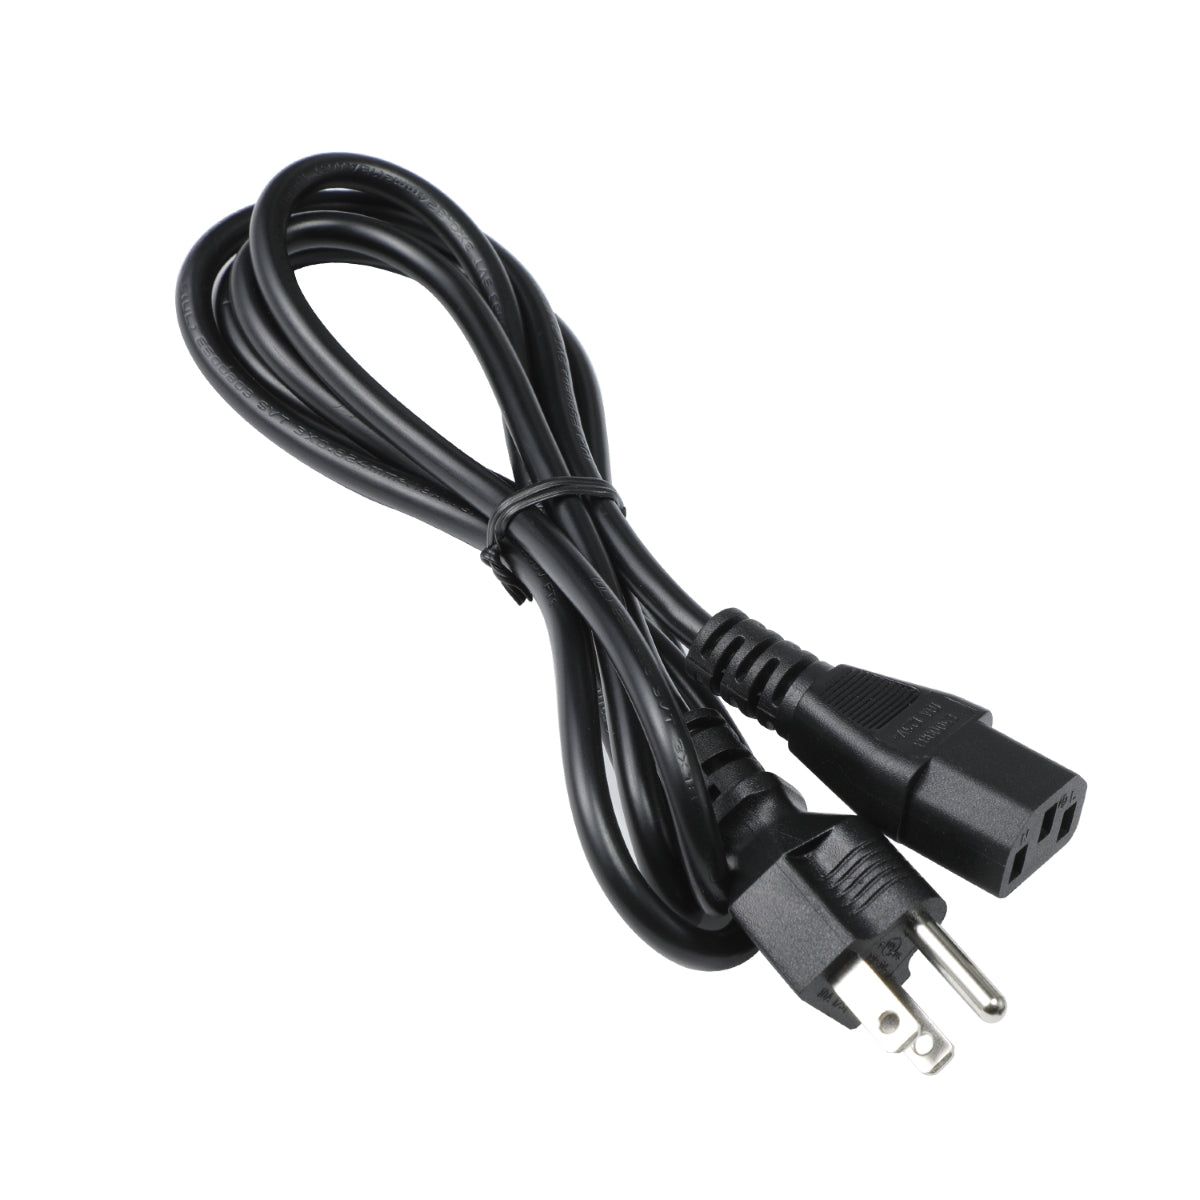 Power Cord for Samsung LS32D85K Monitor TV.